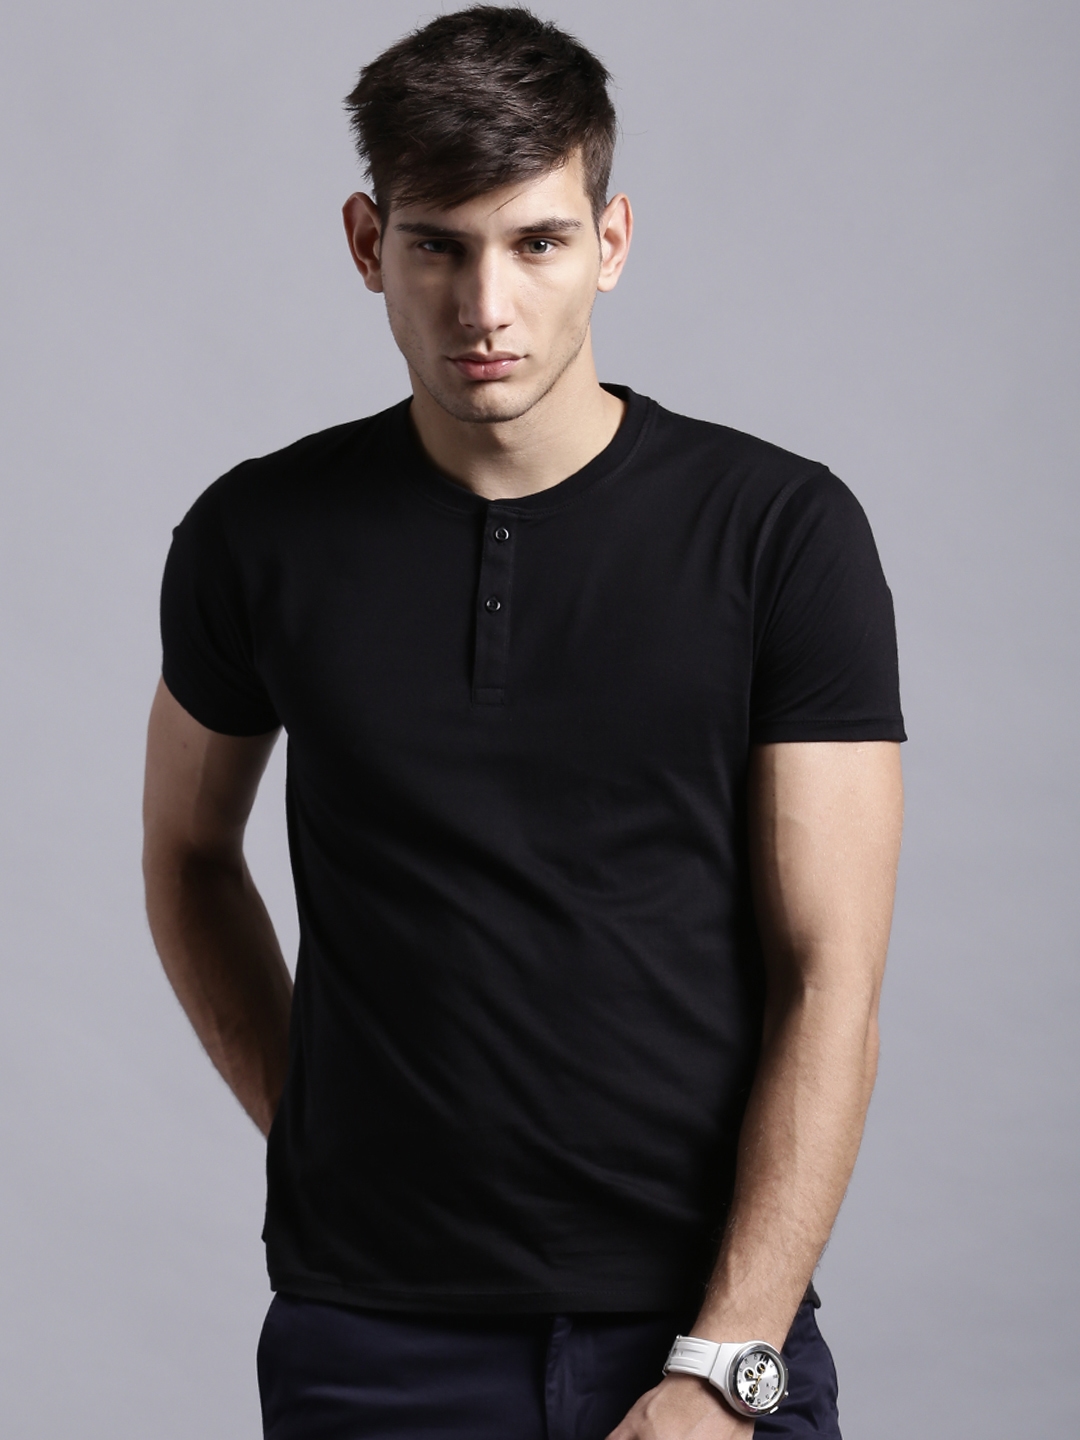 Buy ETHER Henley Cotton T Shirt - Tshirts for Men 1018622 |